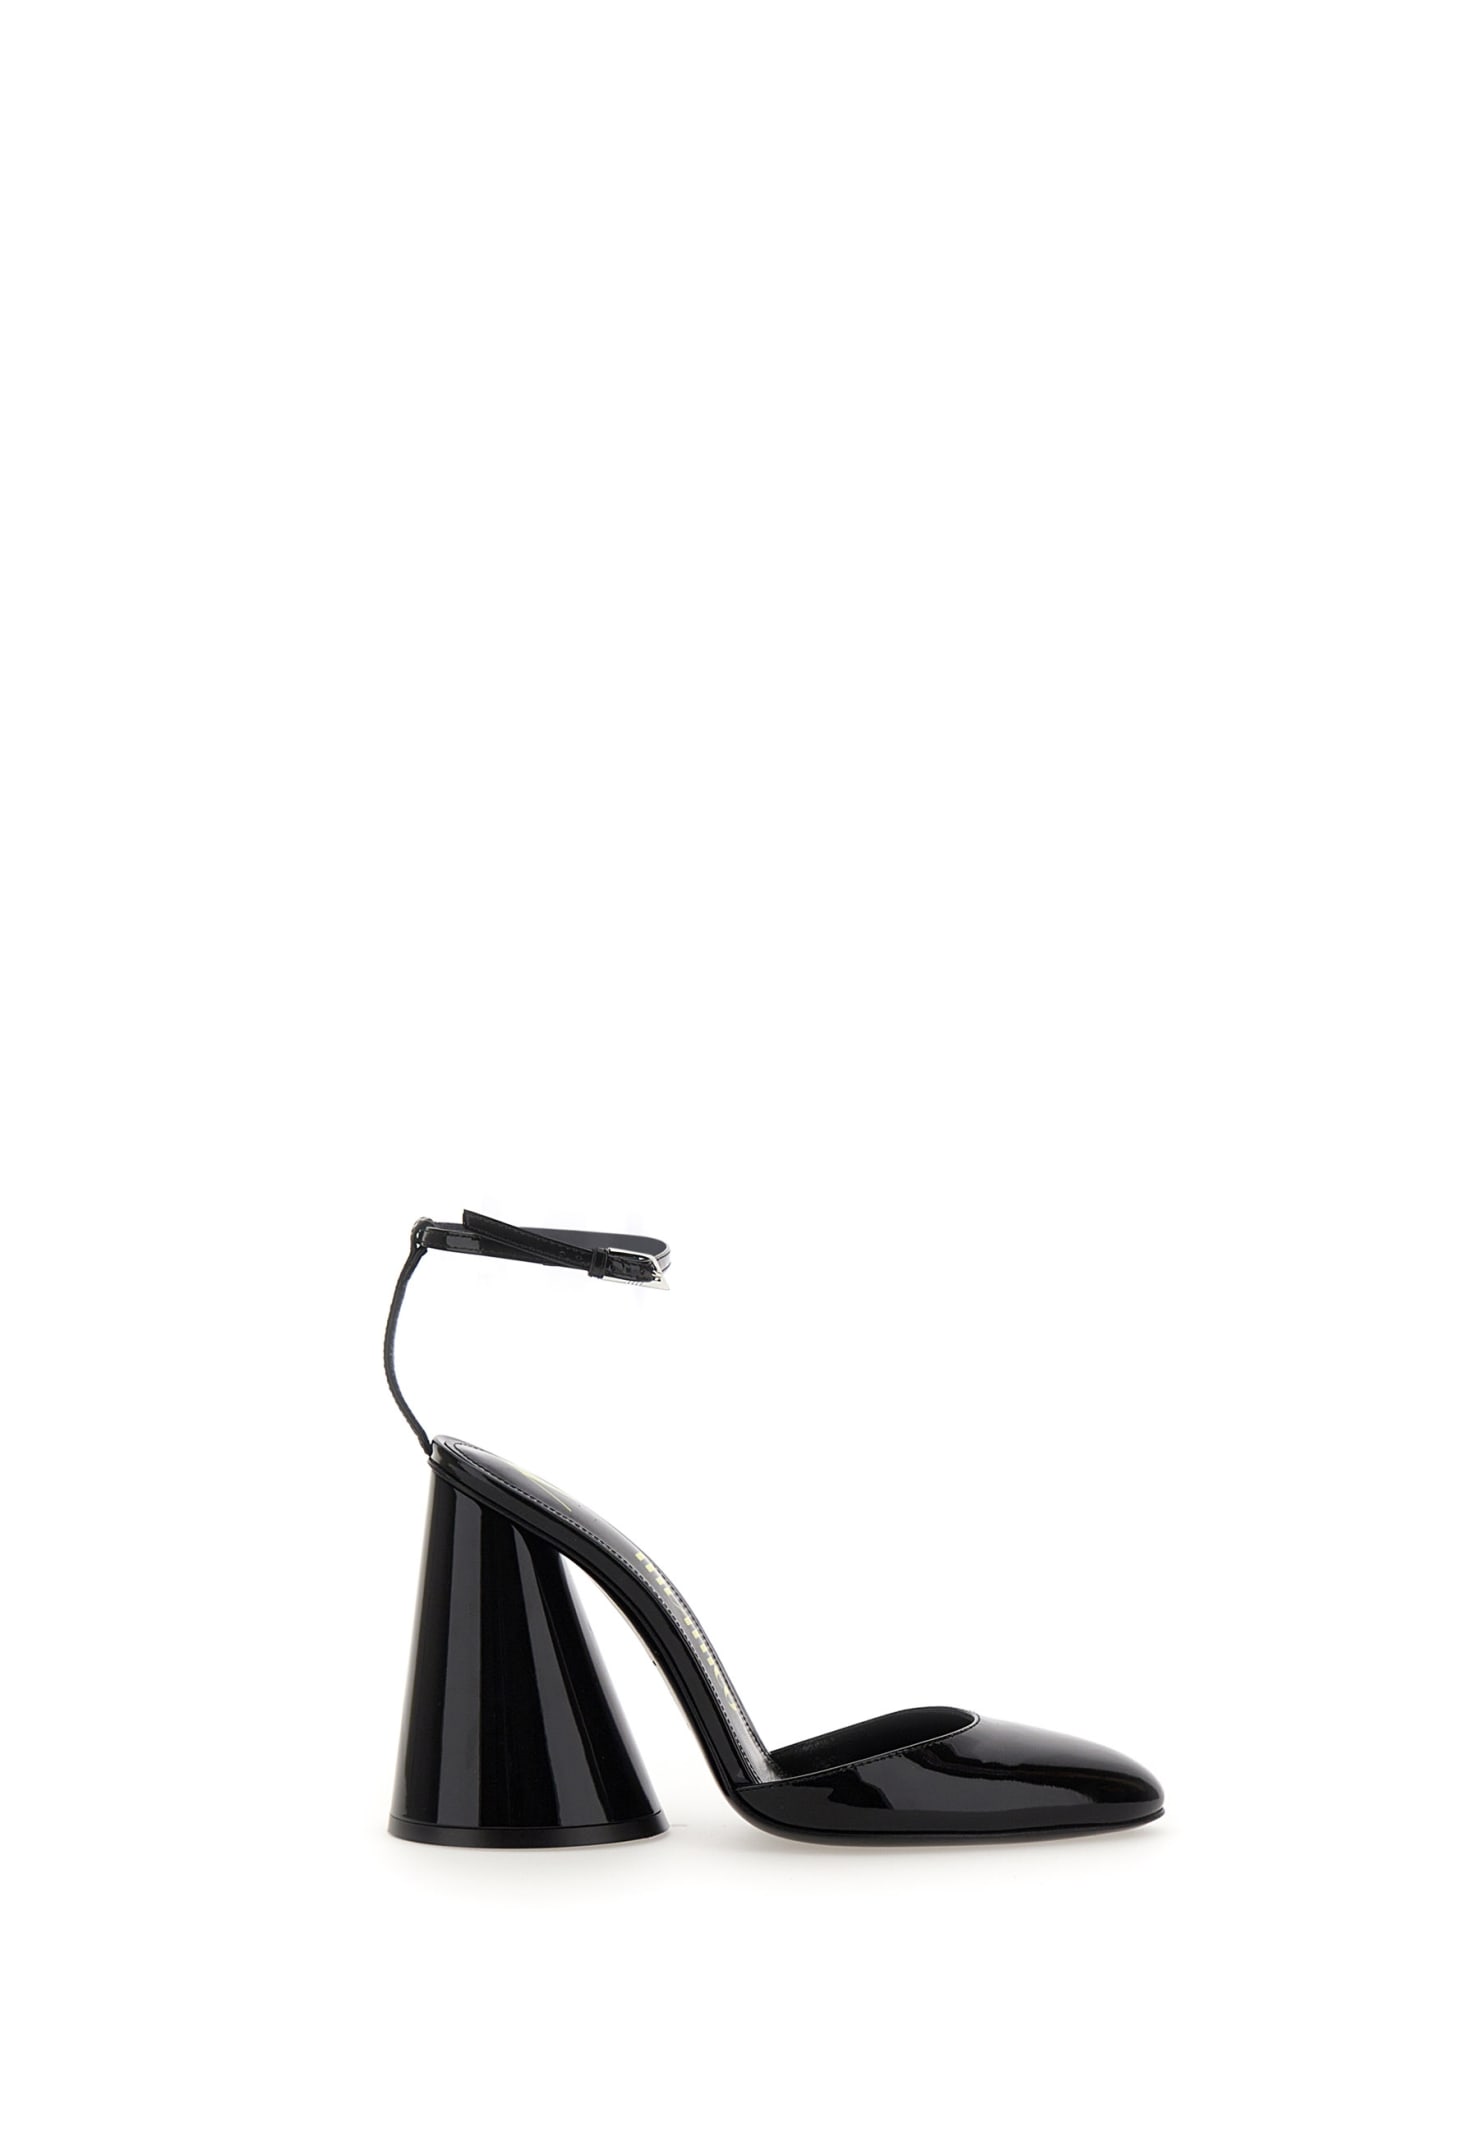 The Attico Heeled Shoes Patent Leather pumps Slingback Luz